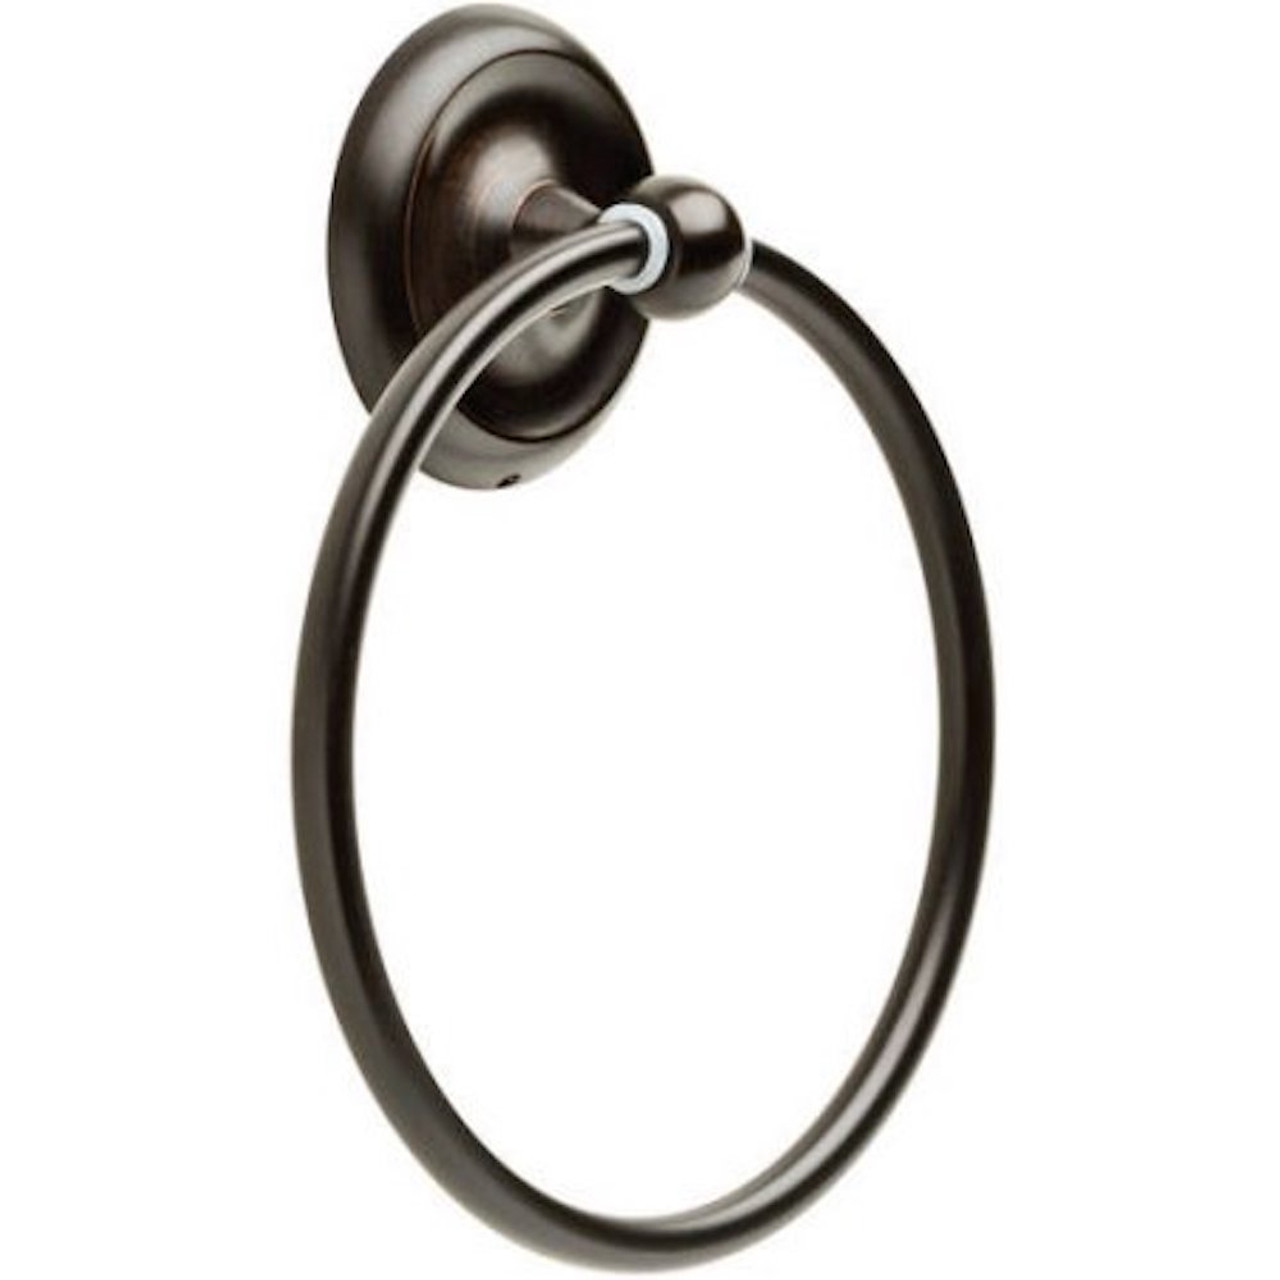 Everything Doors OIL RUBBED BRONZE Towel Ring 